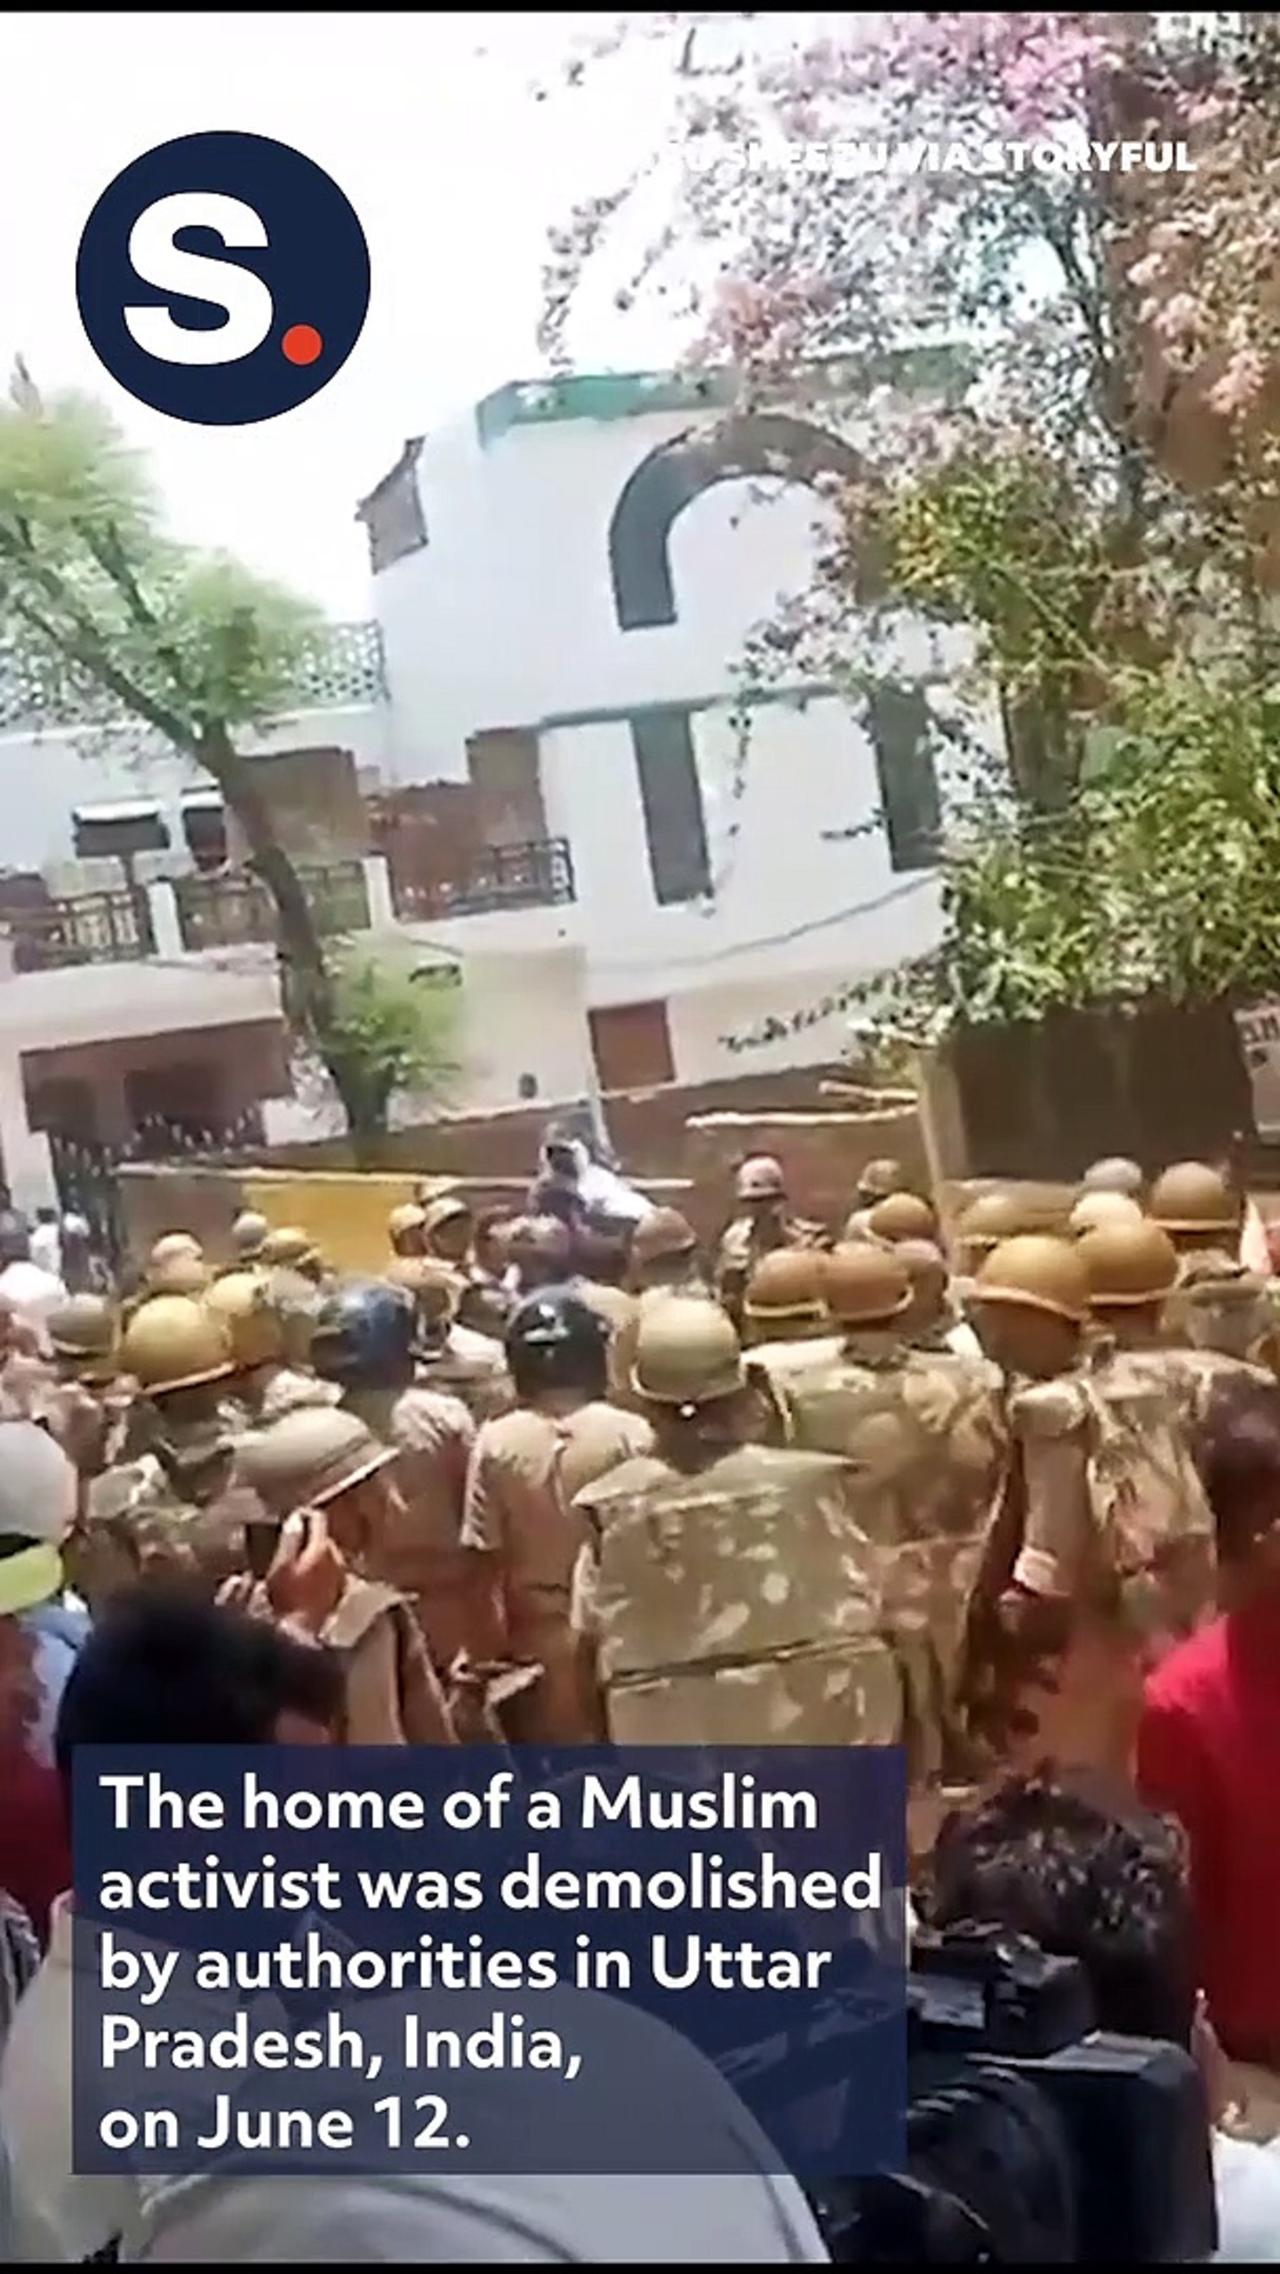 Muslim Activist's Home Demolished in India Following Protests Over Prophet Muhammad Remarks